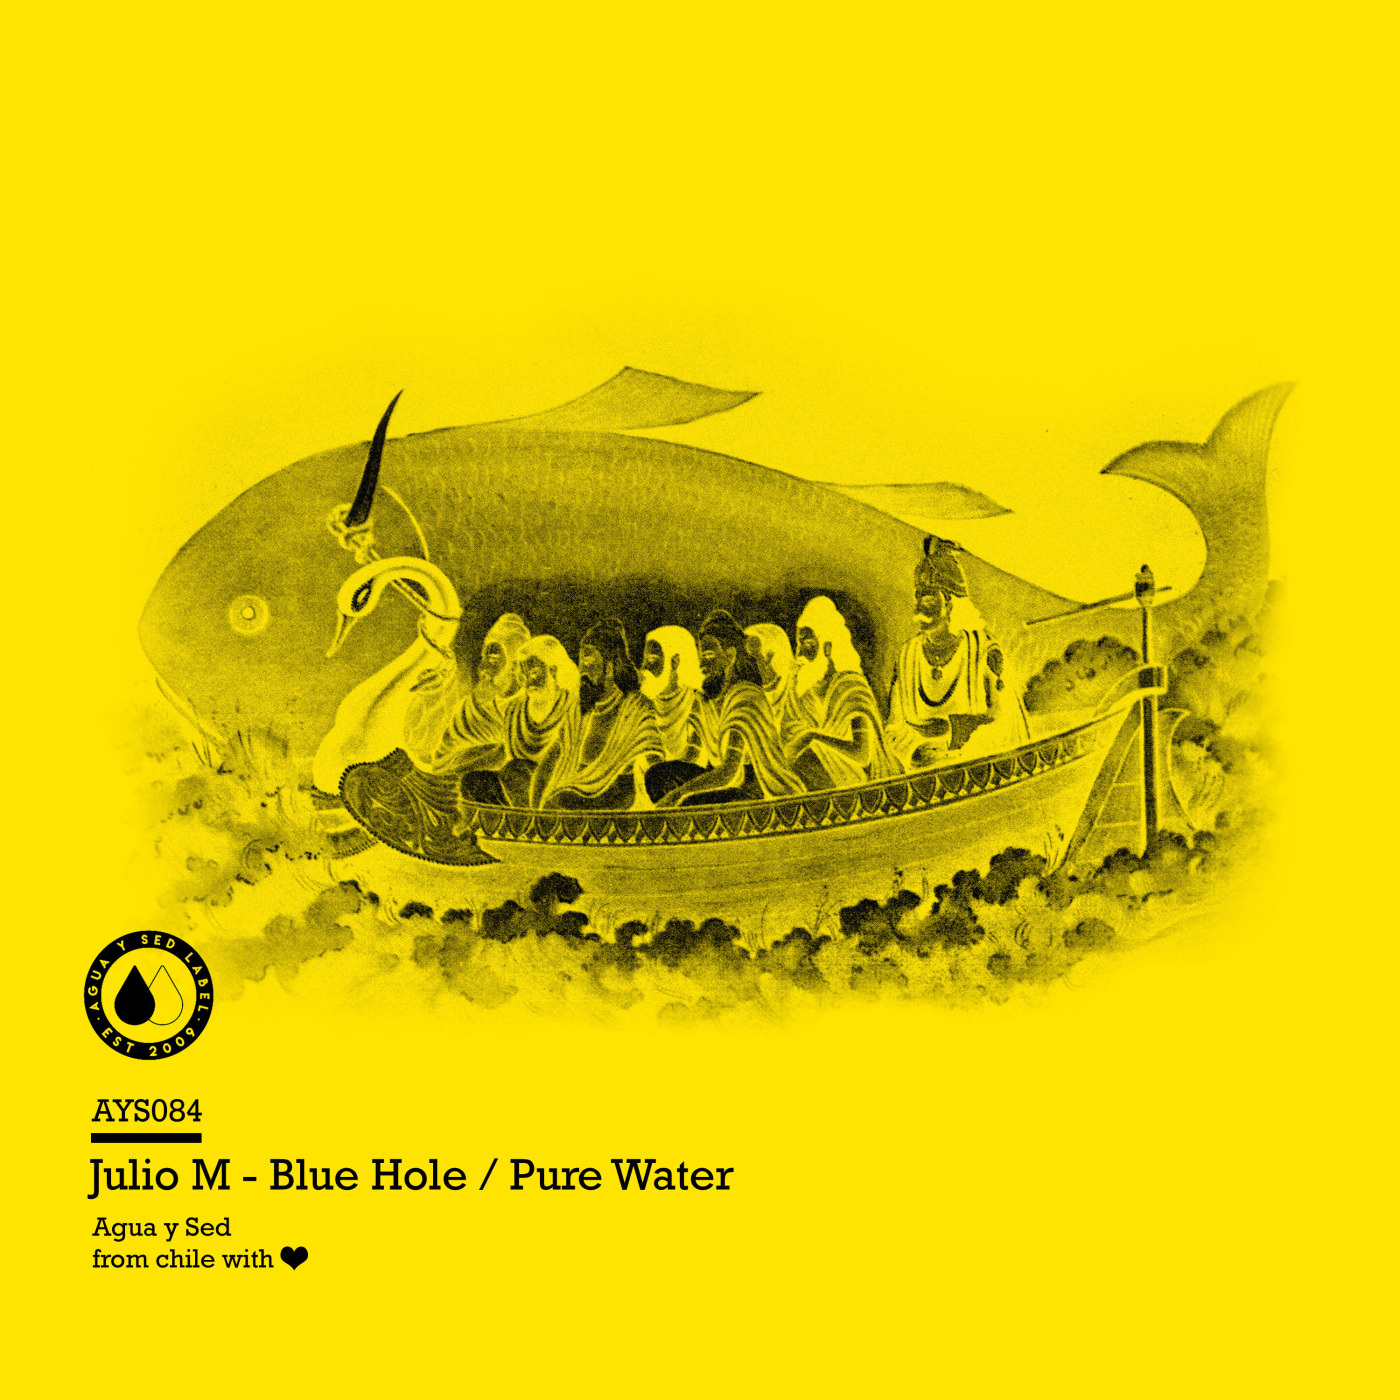 Julio M - Blue Hole / Pure Water / Agua y Sed